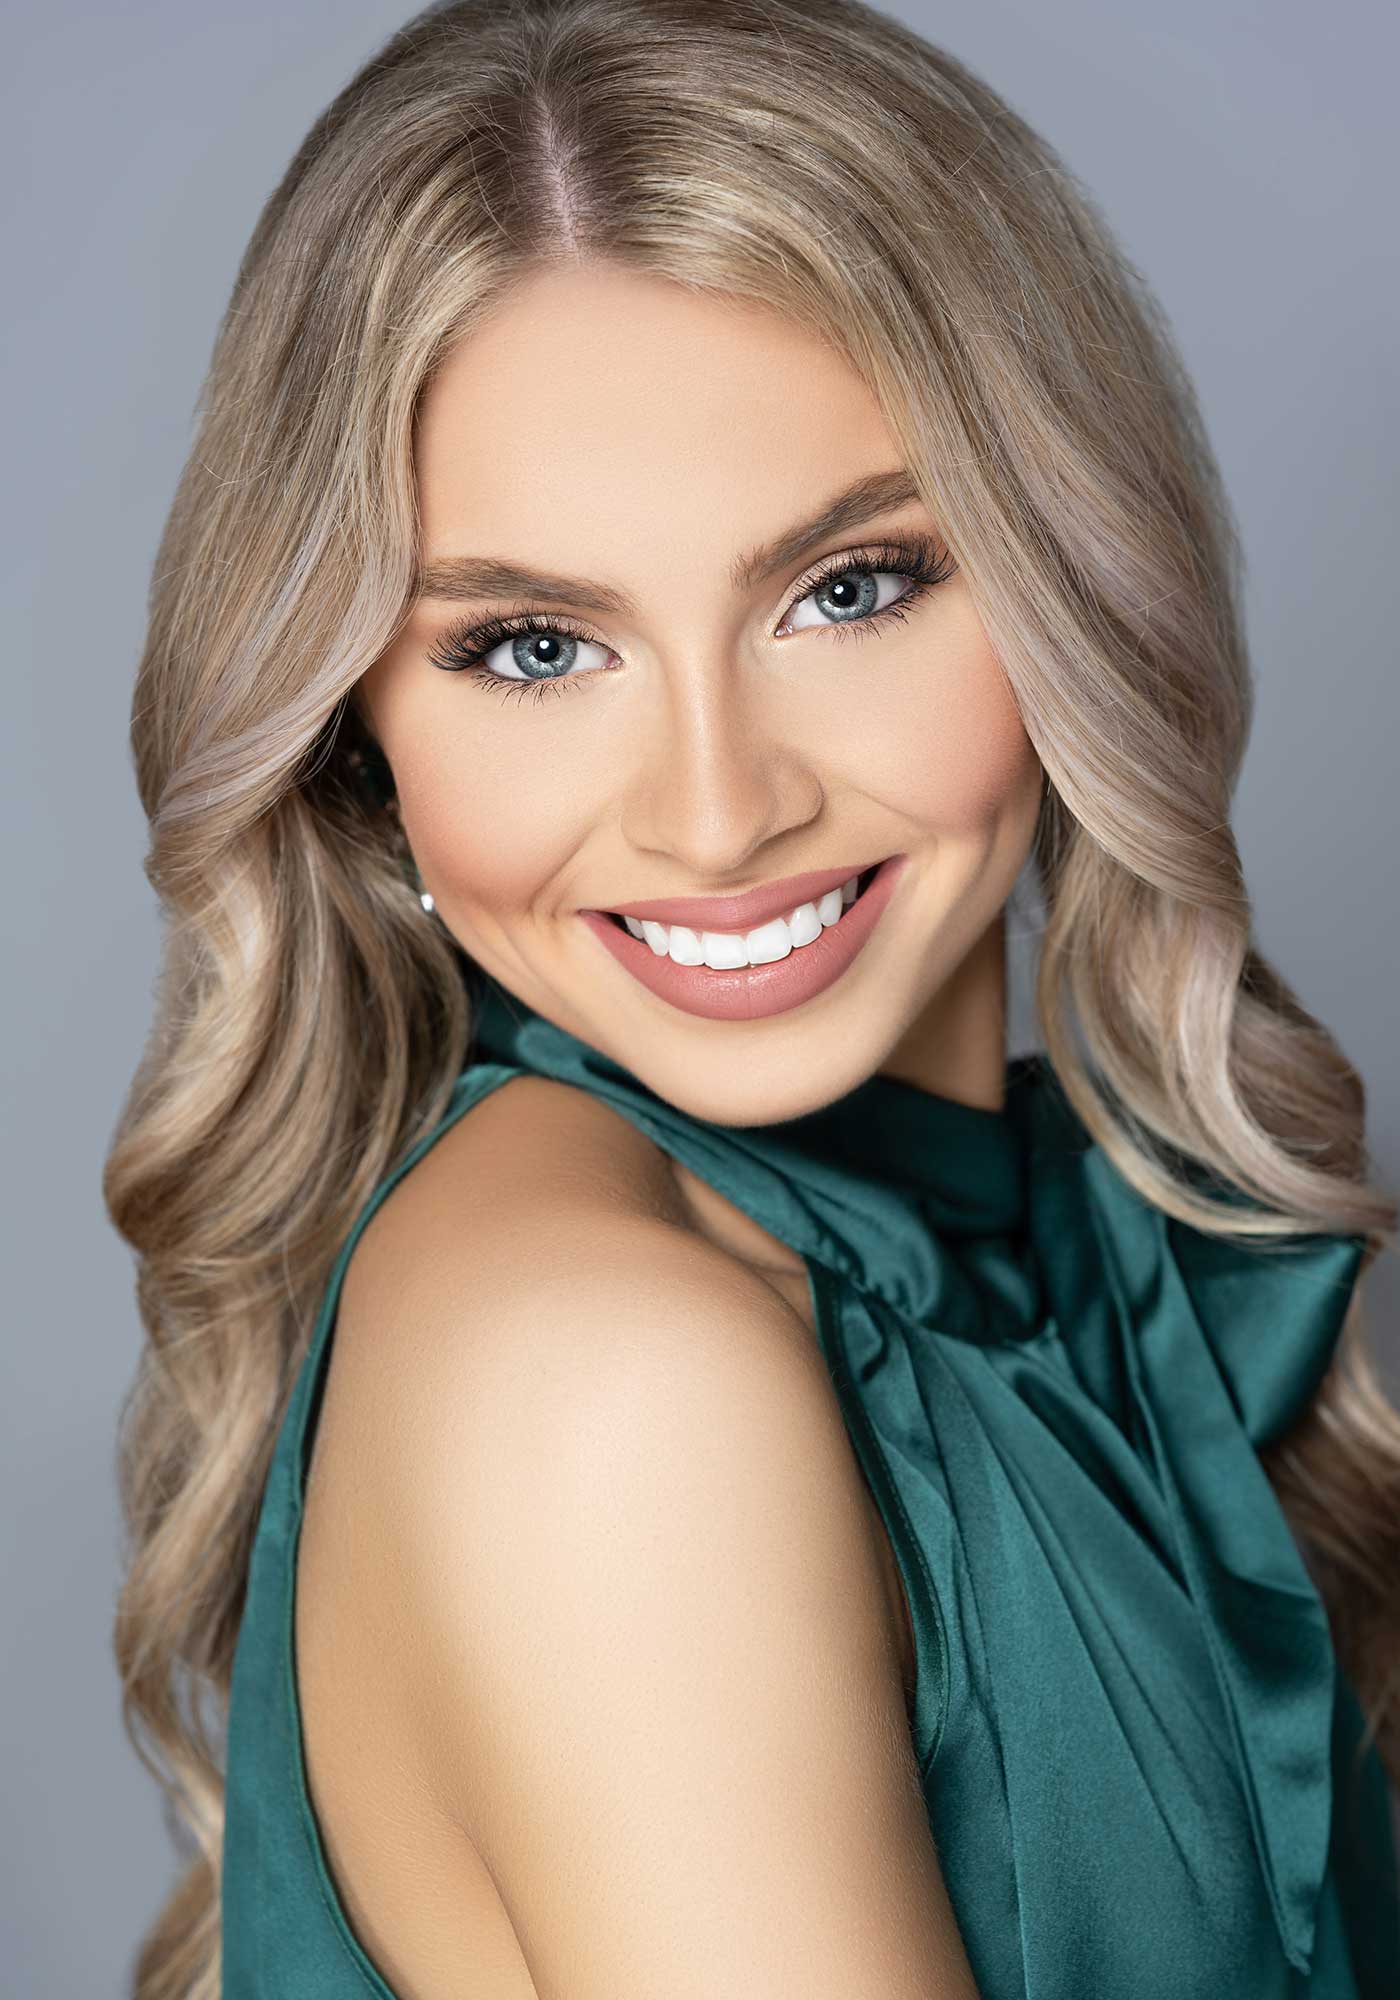 All About Miss Louisiana USA 2022 KT Scannell